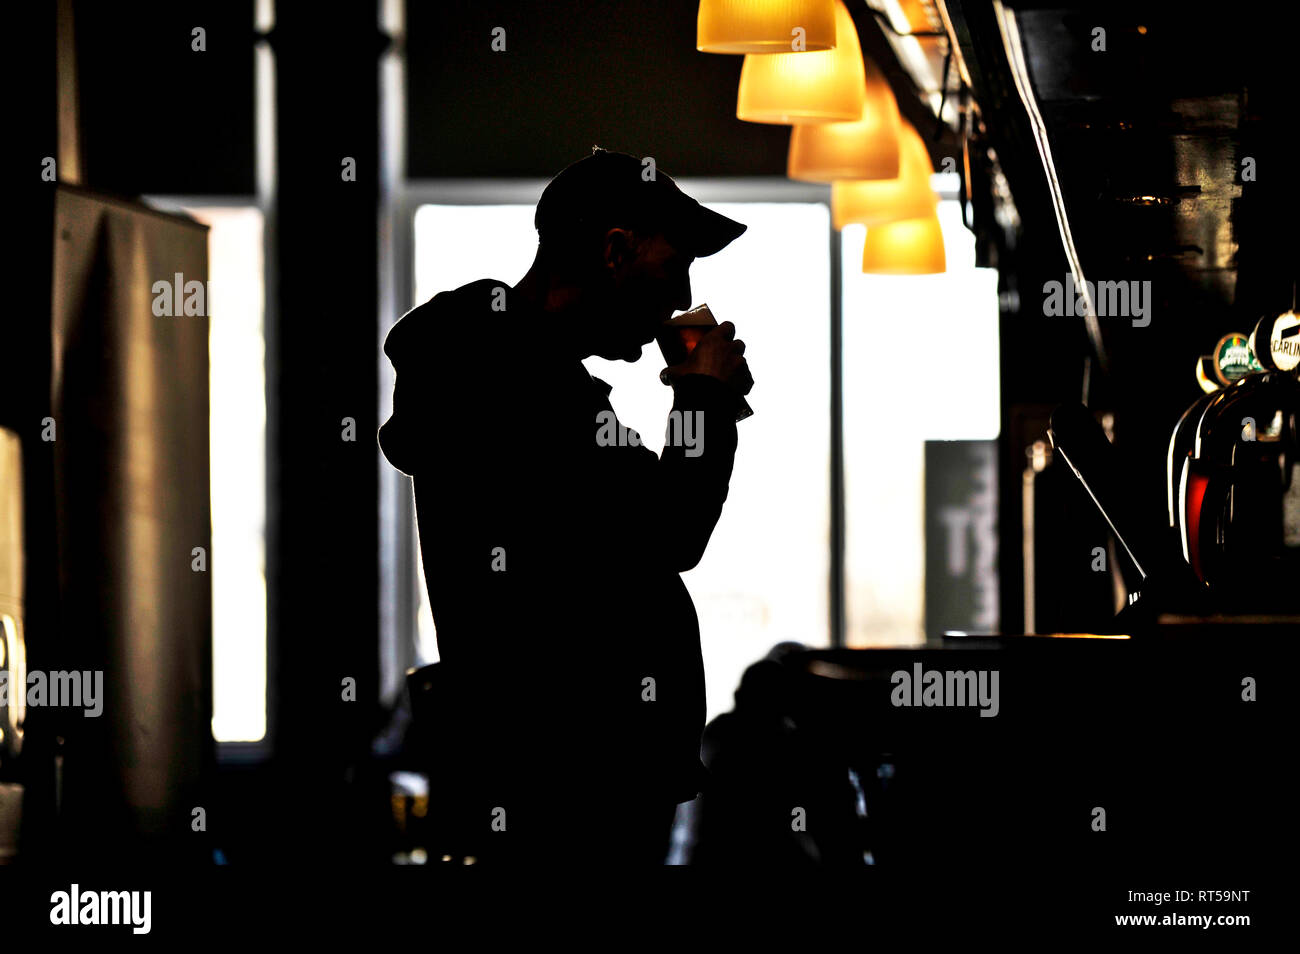 Silhouette of unidentified man wearing baseball cap drinking beer at bar in pub Stock Photo